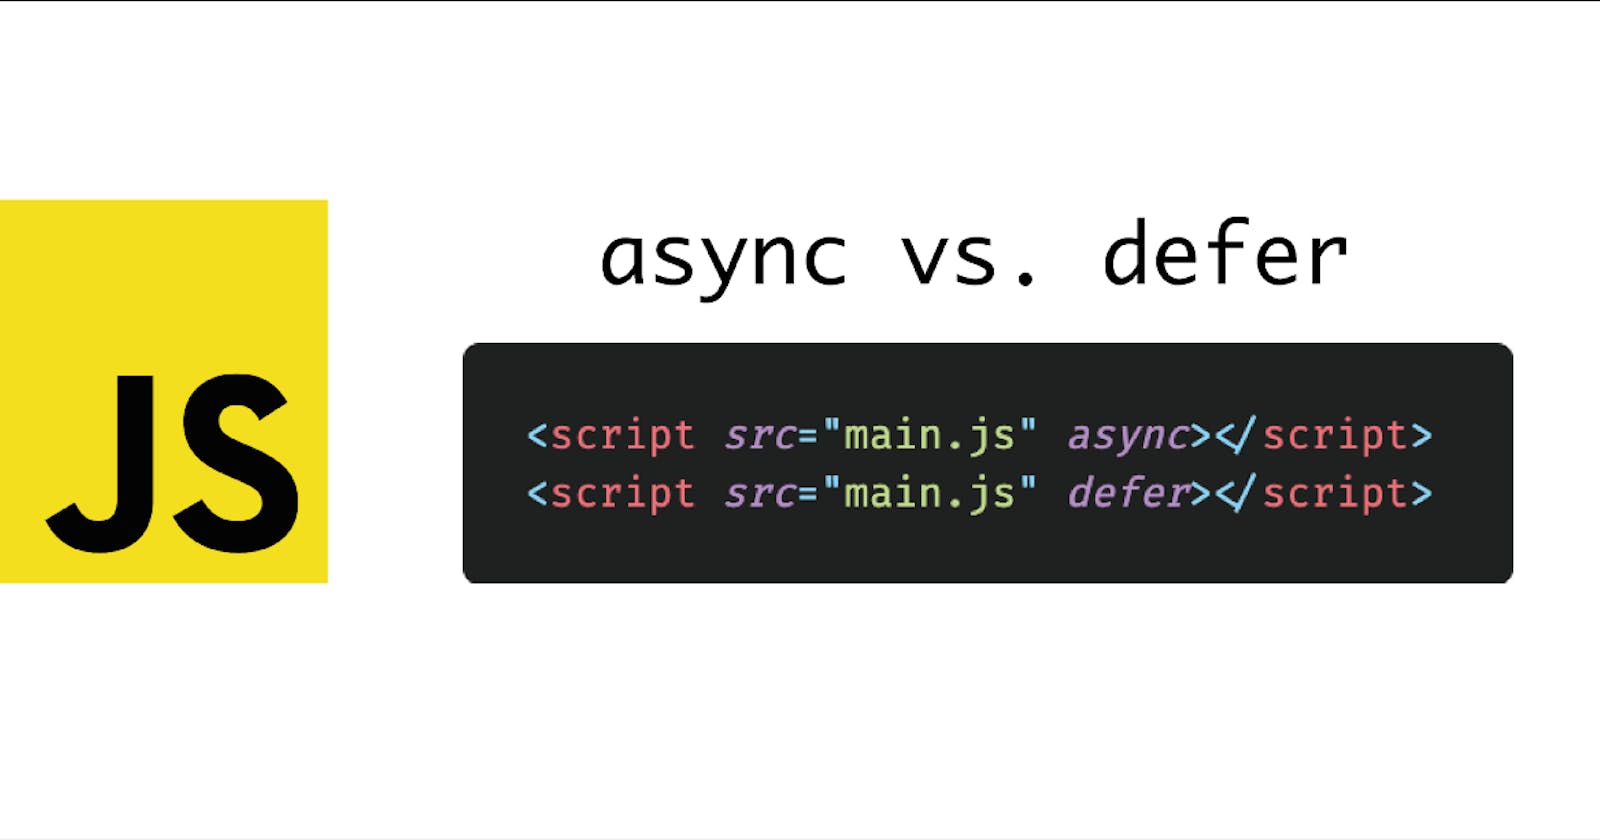 async and defer attribute in the script tag?